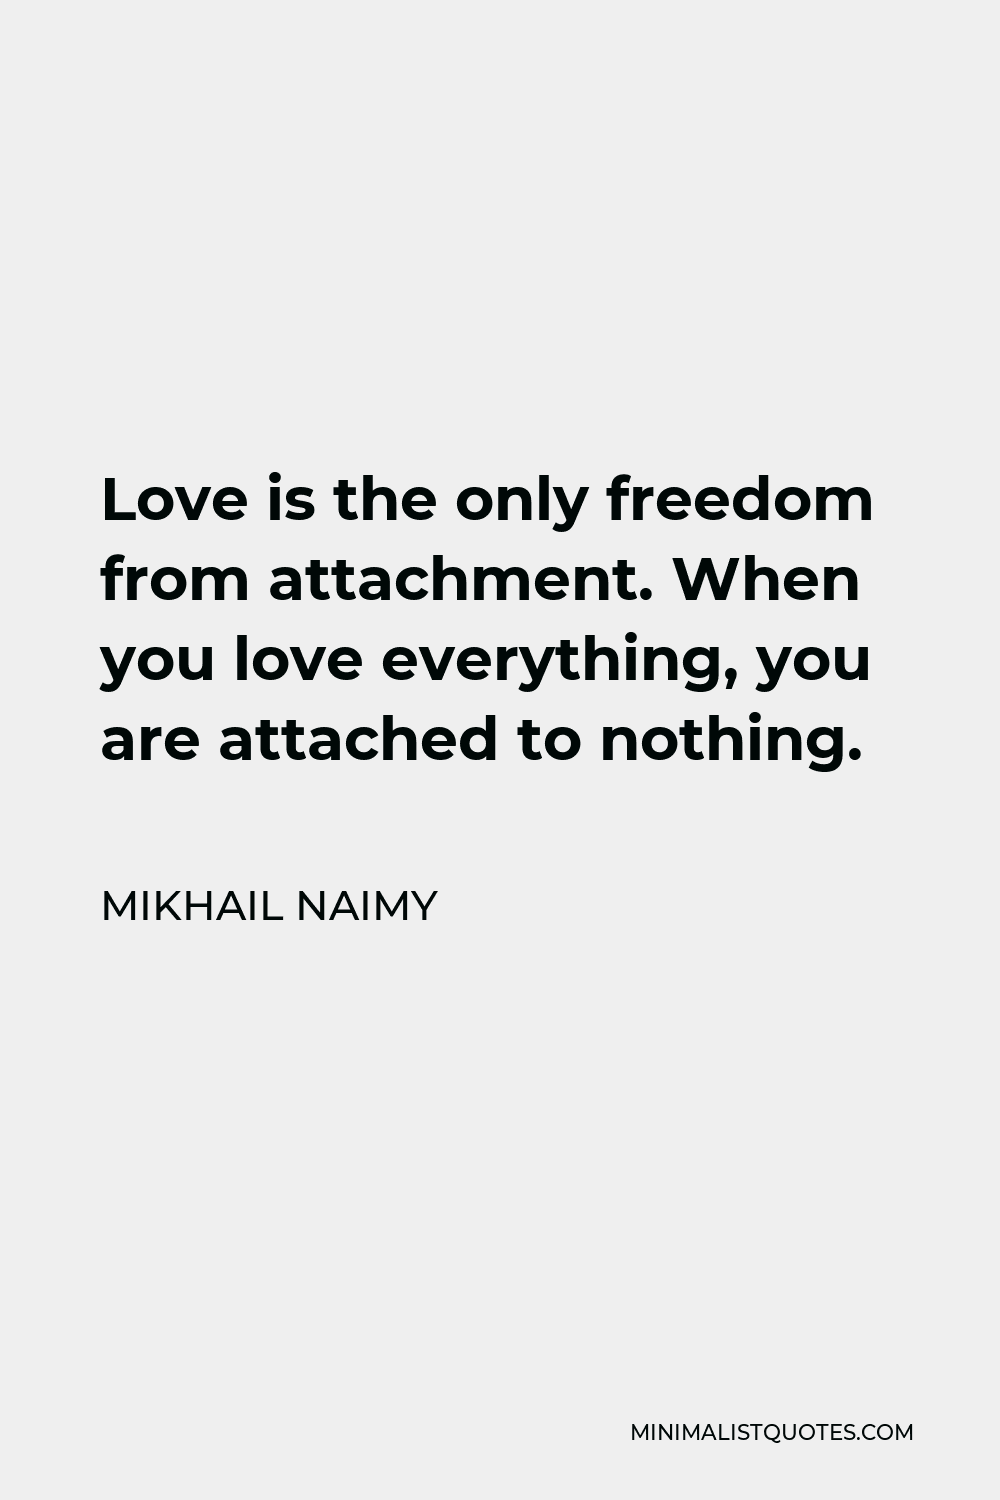 Mikhail Naimy Quote - Love is the only freedom from attachment. When you love everything, you are attached to nothing.